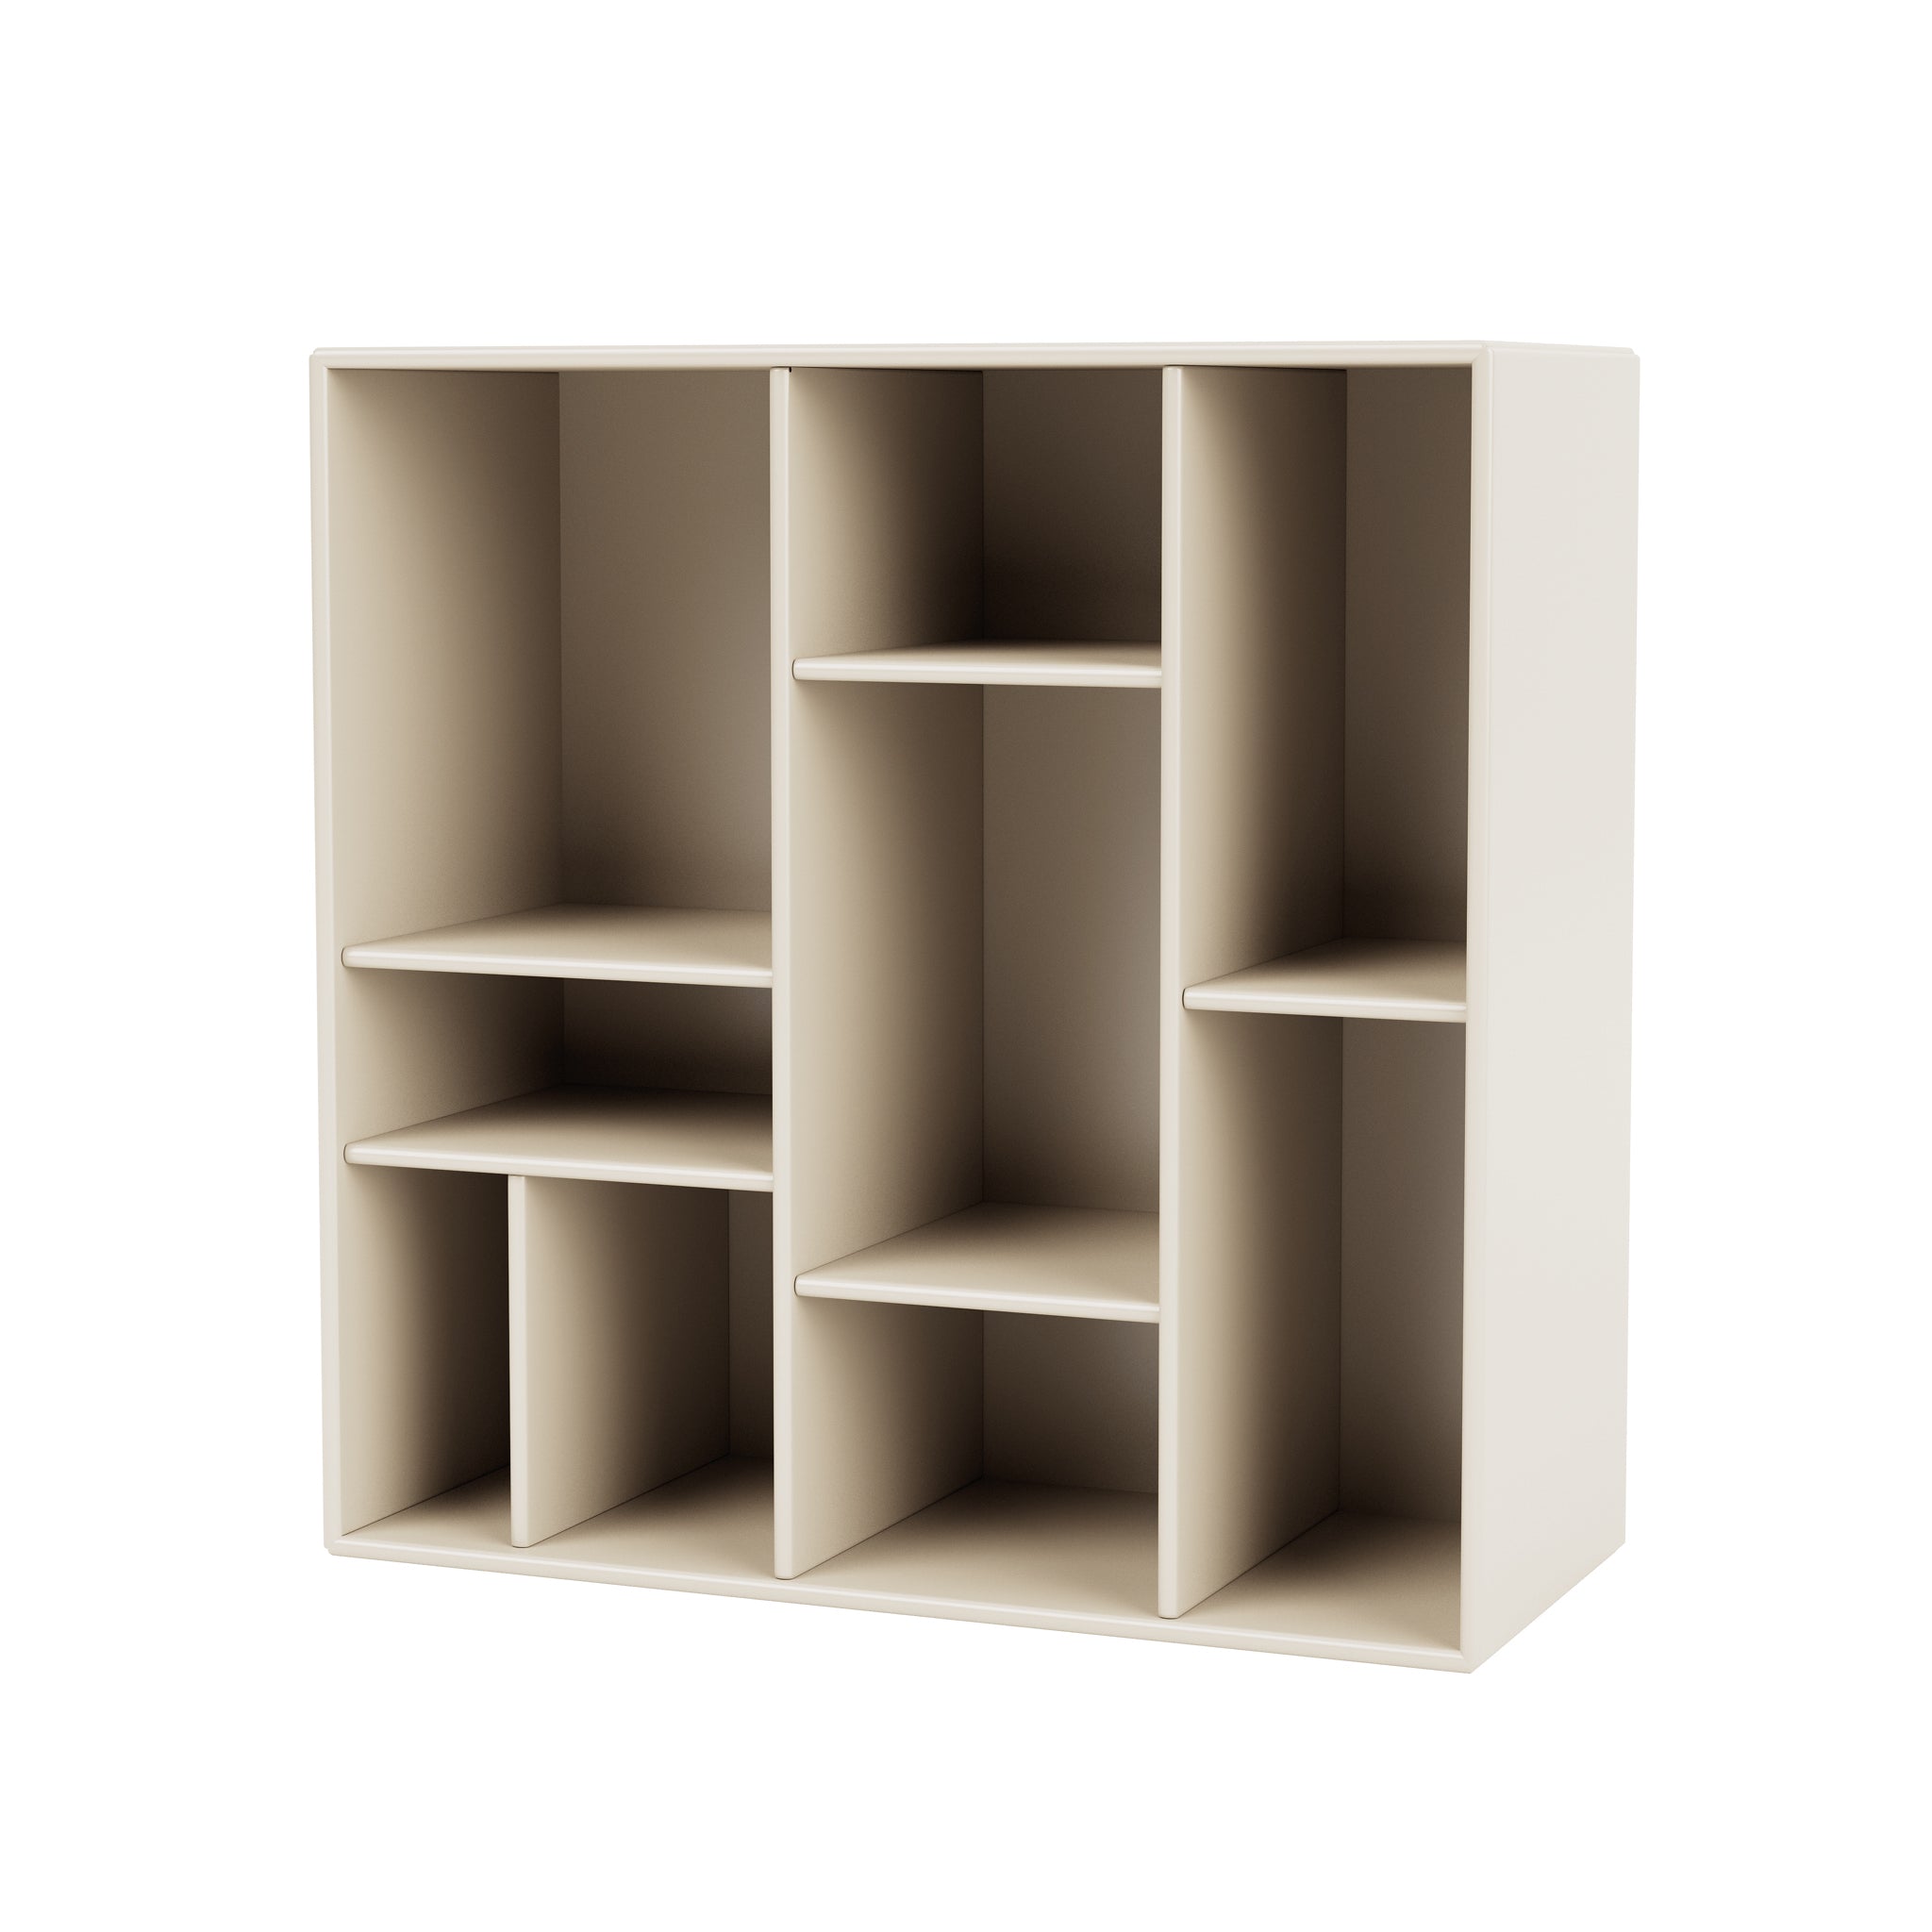 Compile Bookcase by Montana Furniture